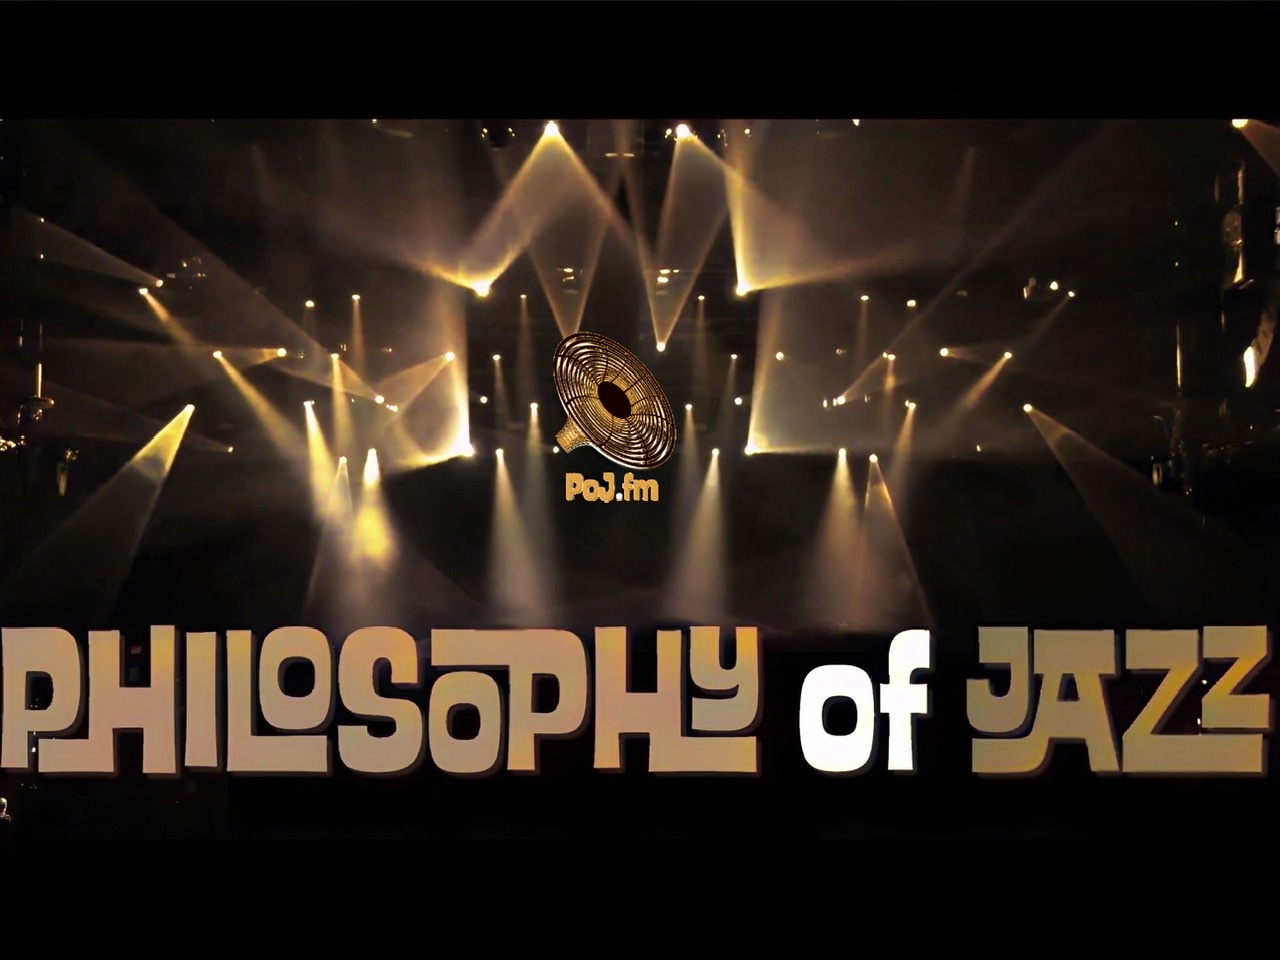 An unframed black background with numerous golden spot lights projecting through it in all directions with a large golden PoJ.fm logo at center and the large words "Philosophy of Jazz" in muted gold color with "of" in white at center bottom.